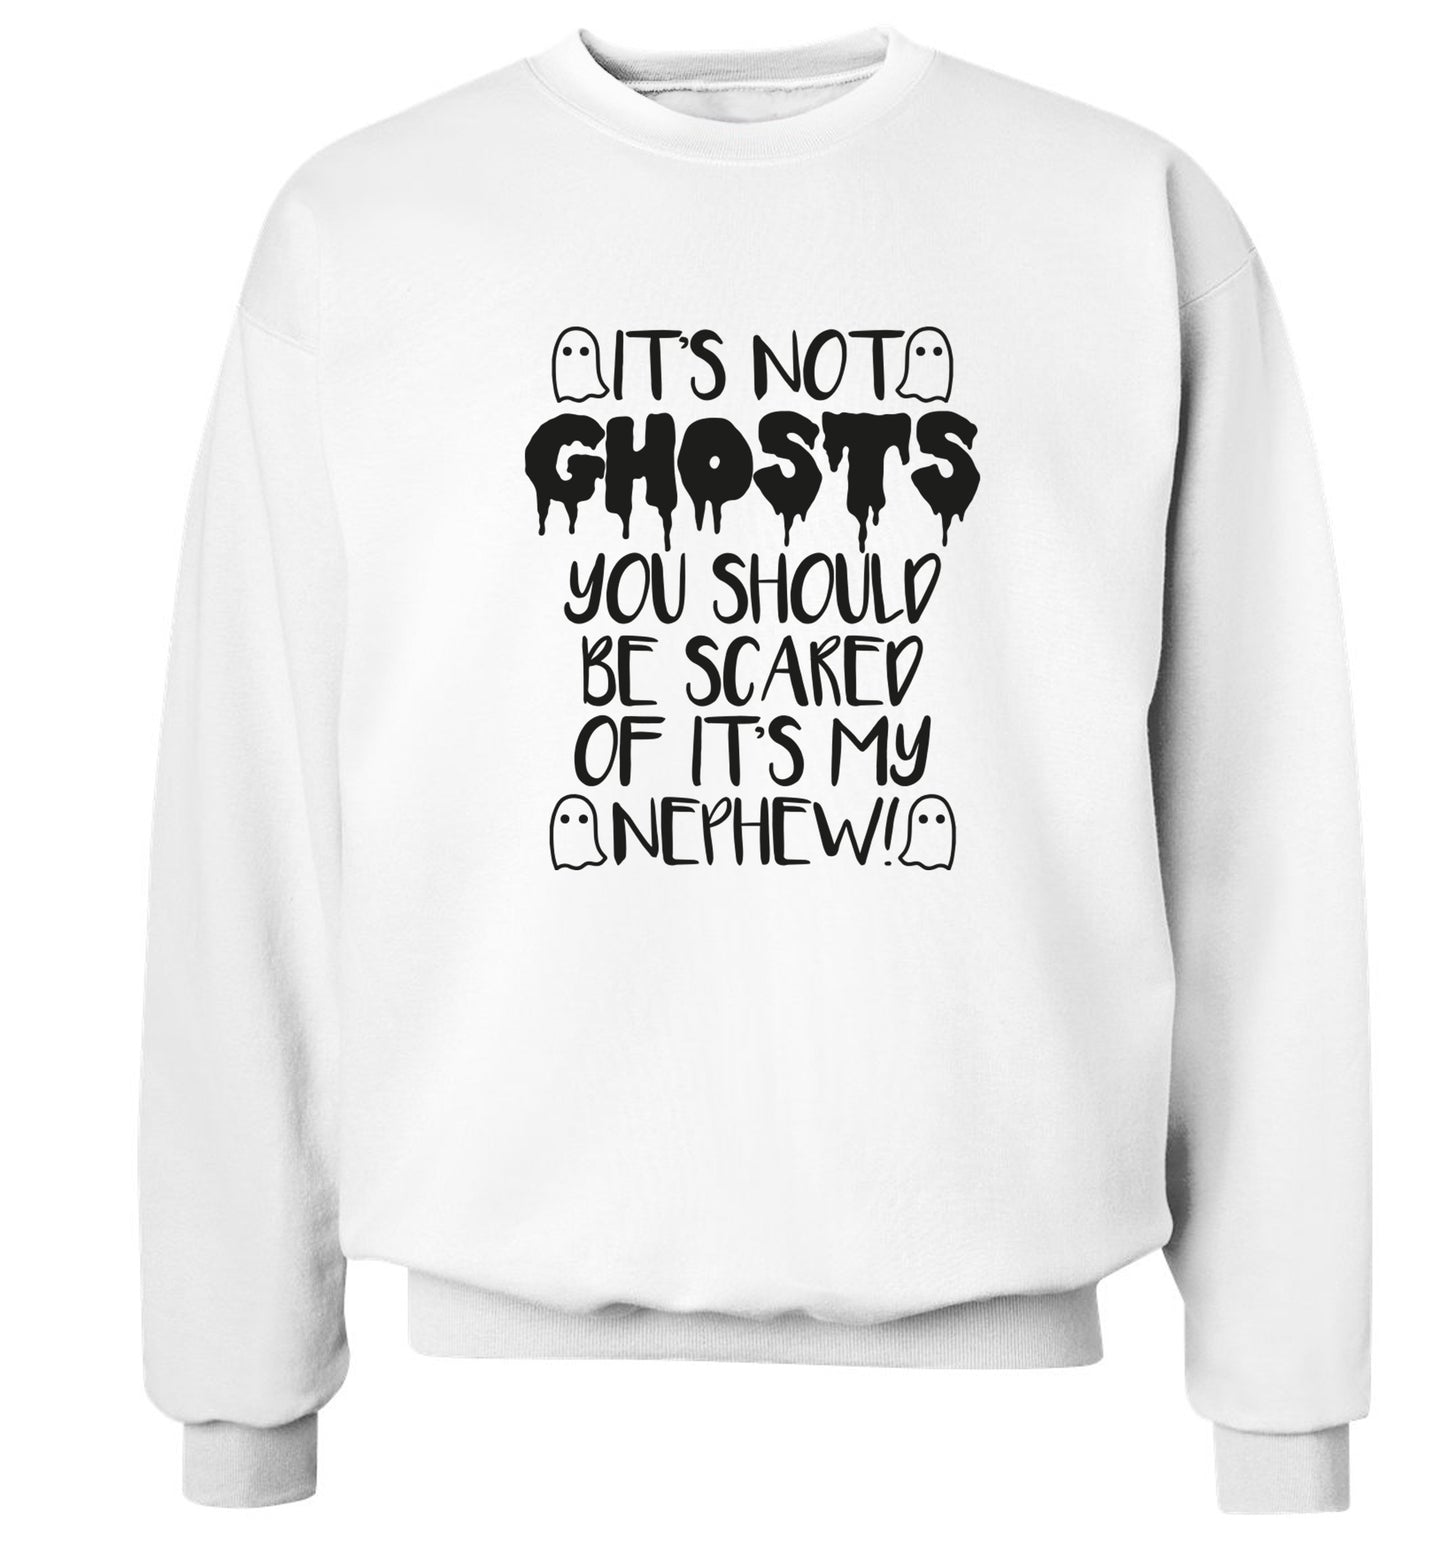 It's not ghosts you should be scared of it's my nephew! Adult's unisex white Sweater 2XL